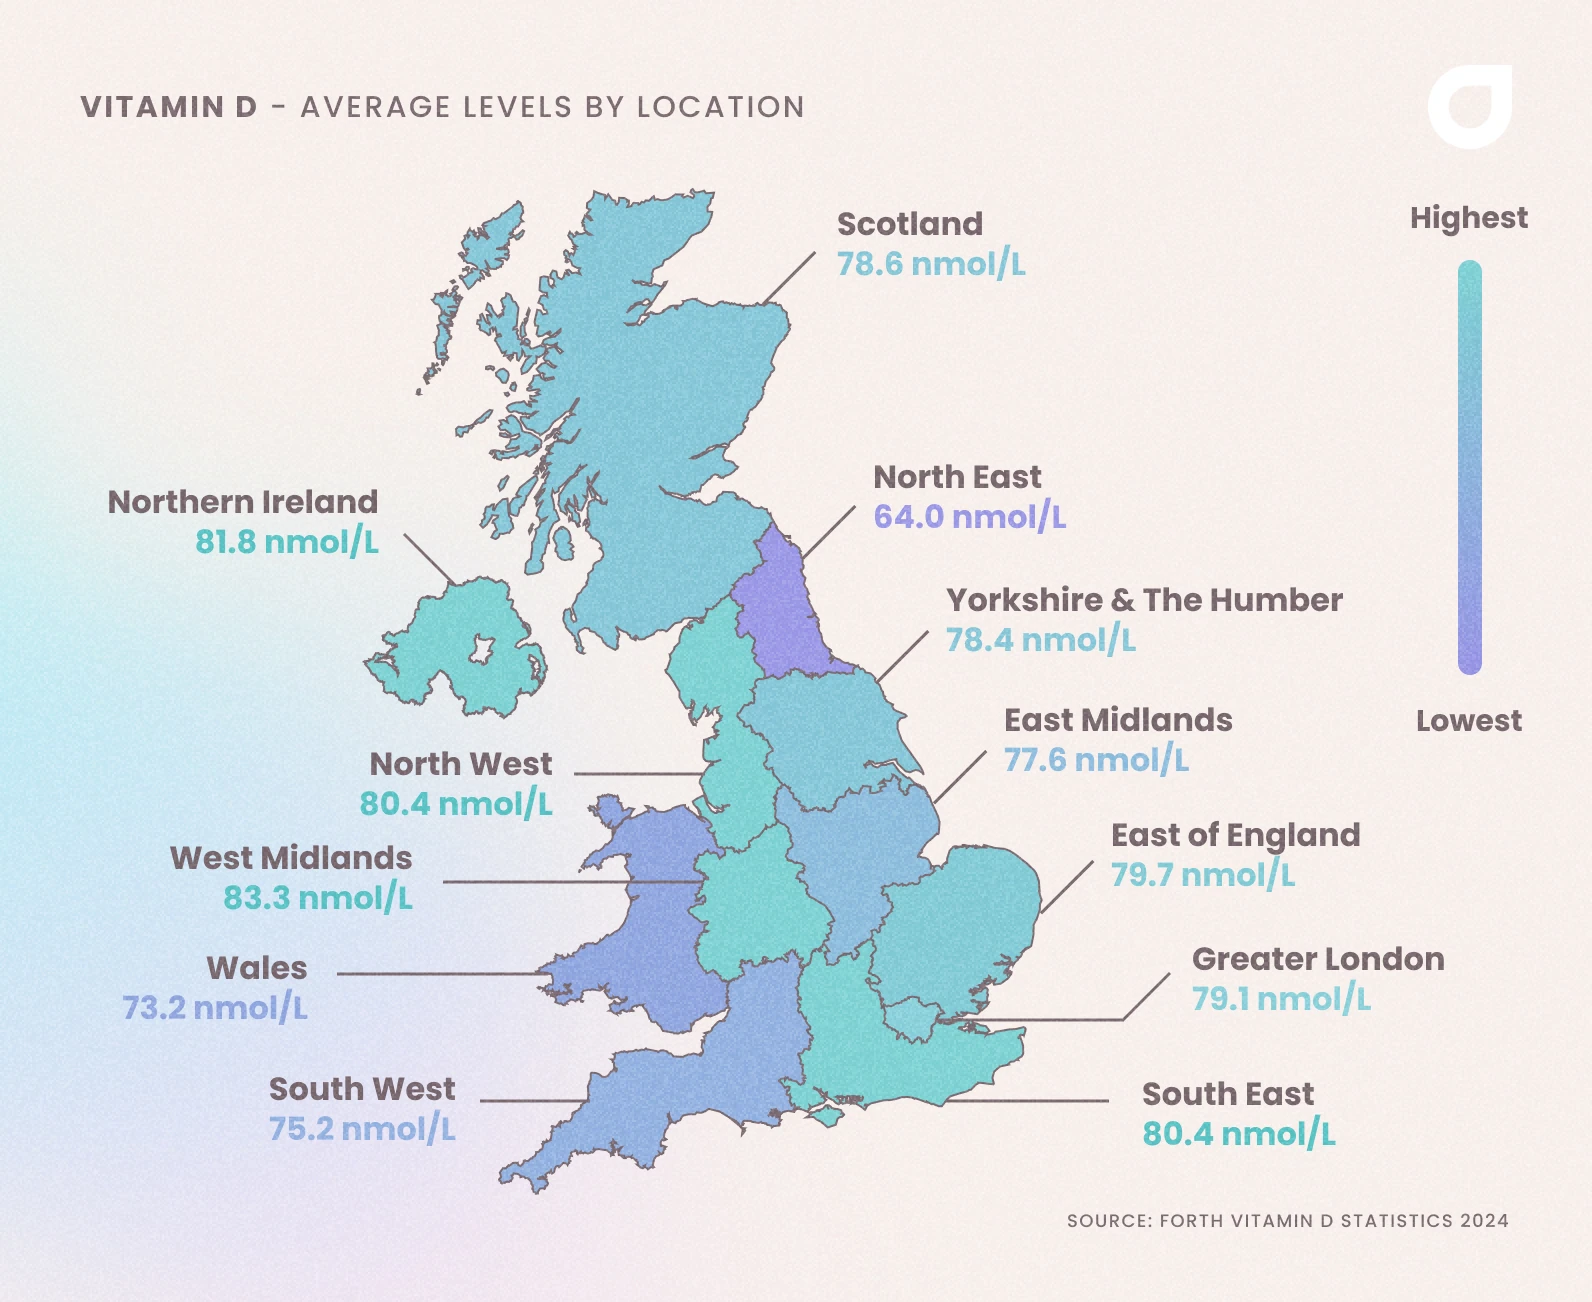 A map of the UK showing the average vitamin D level by region